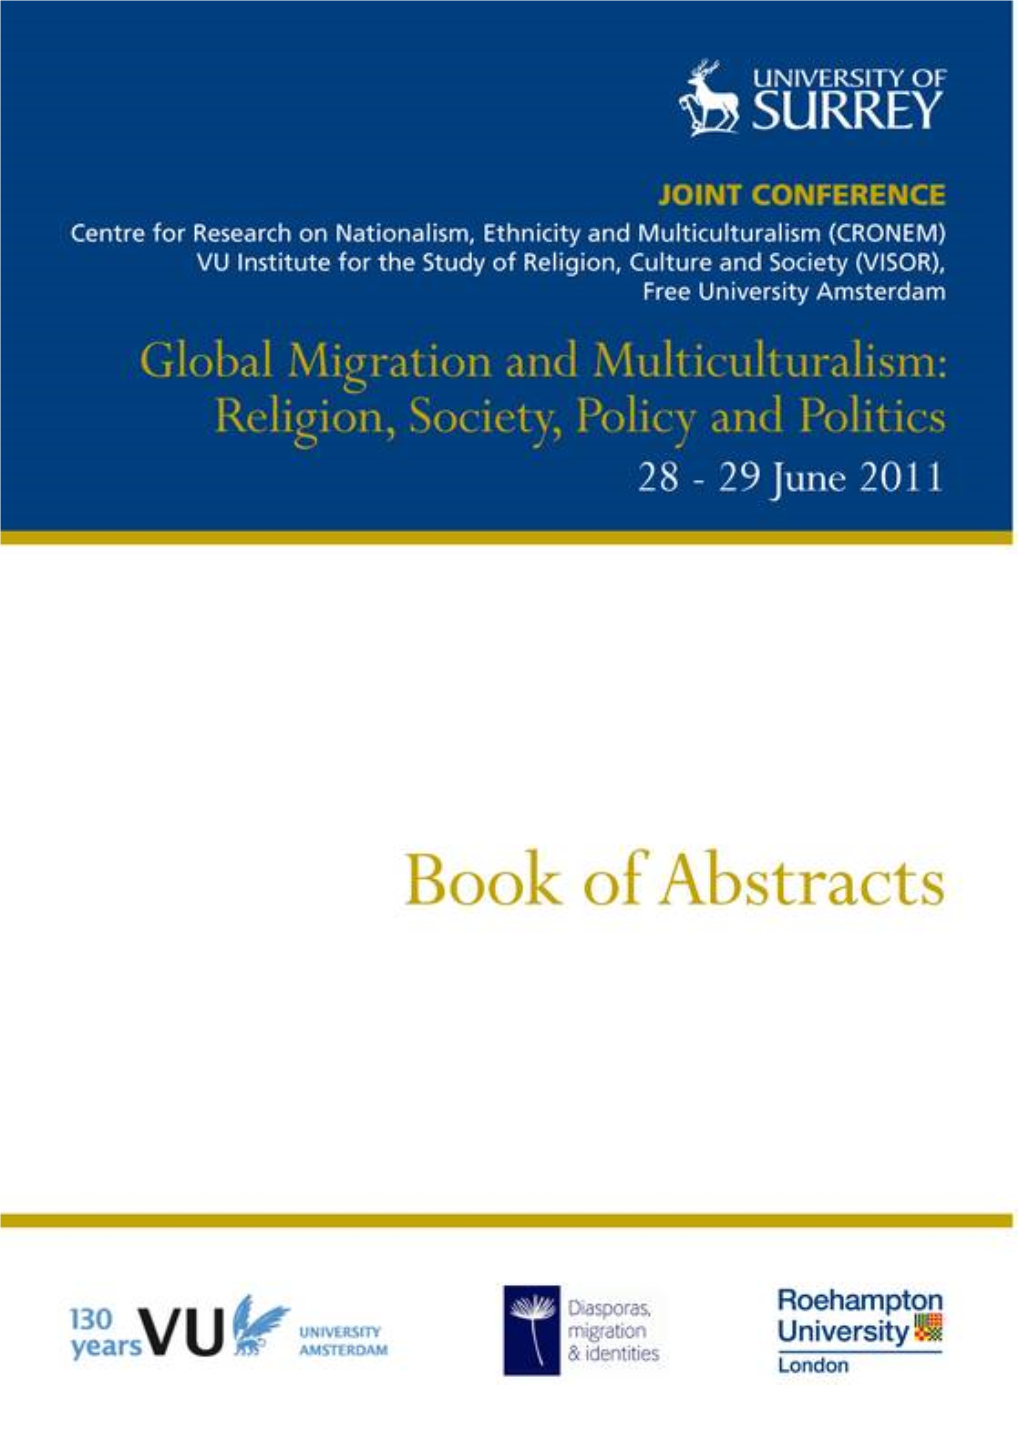 Global Migration and Multiculturalism: Religion